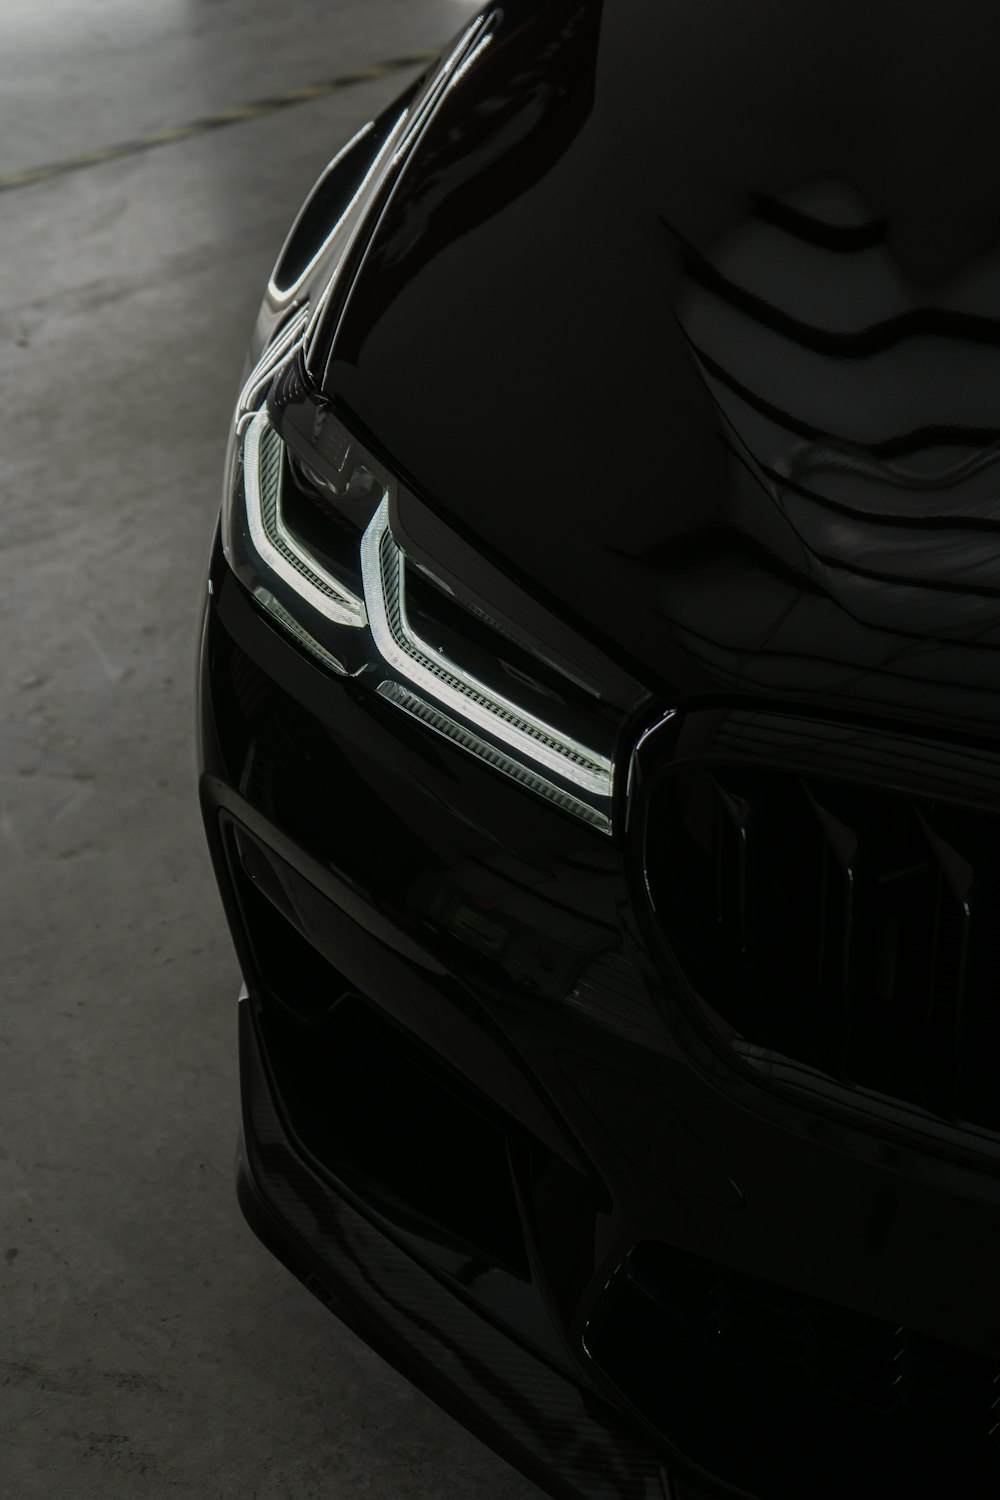 a close up of the front of a black car